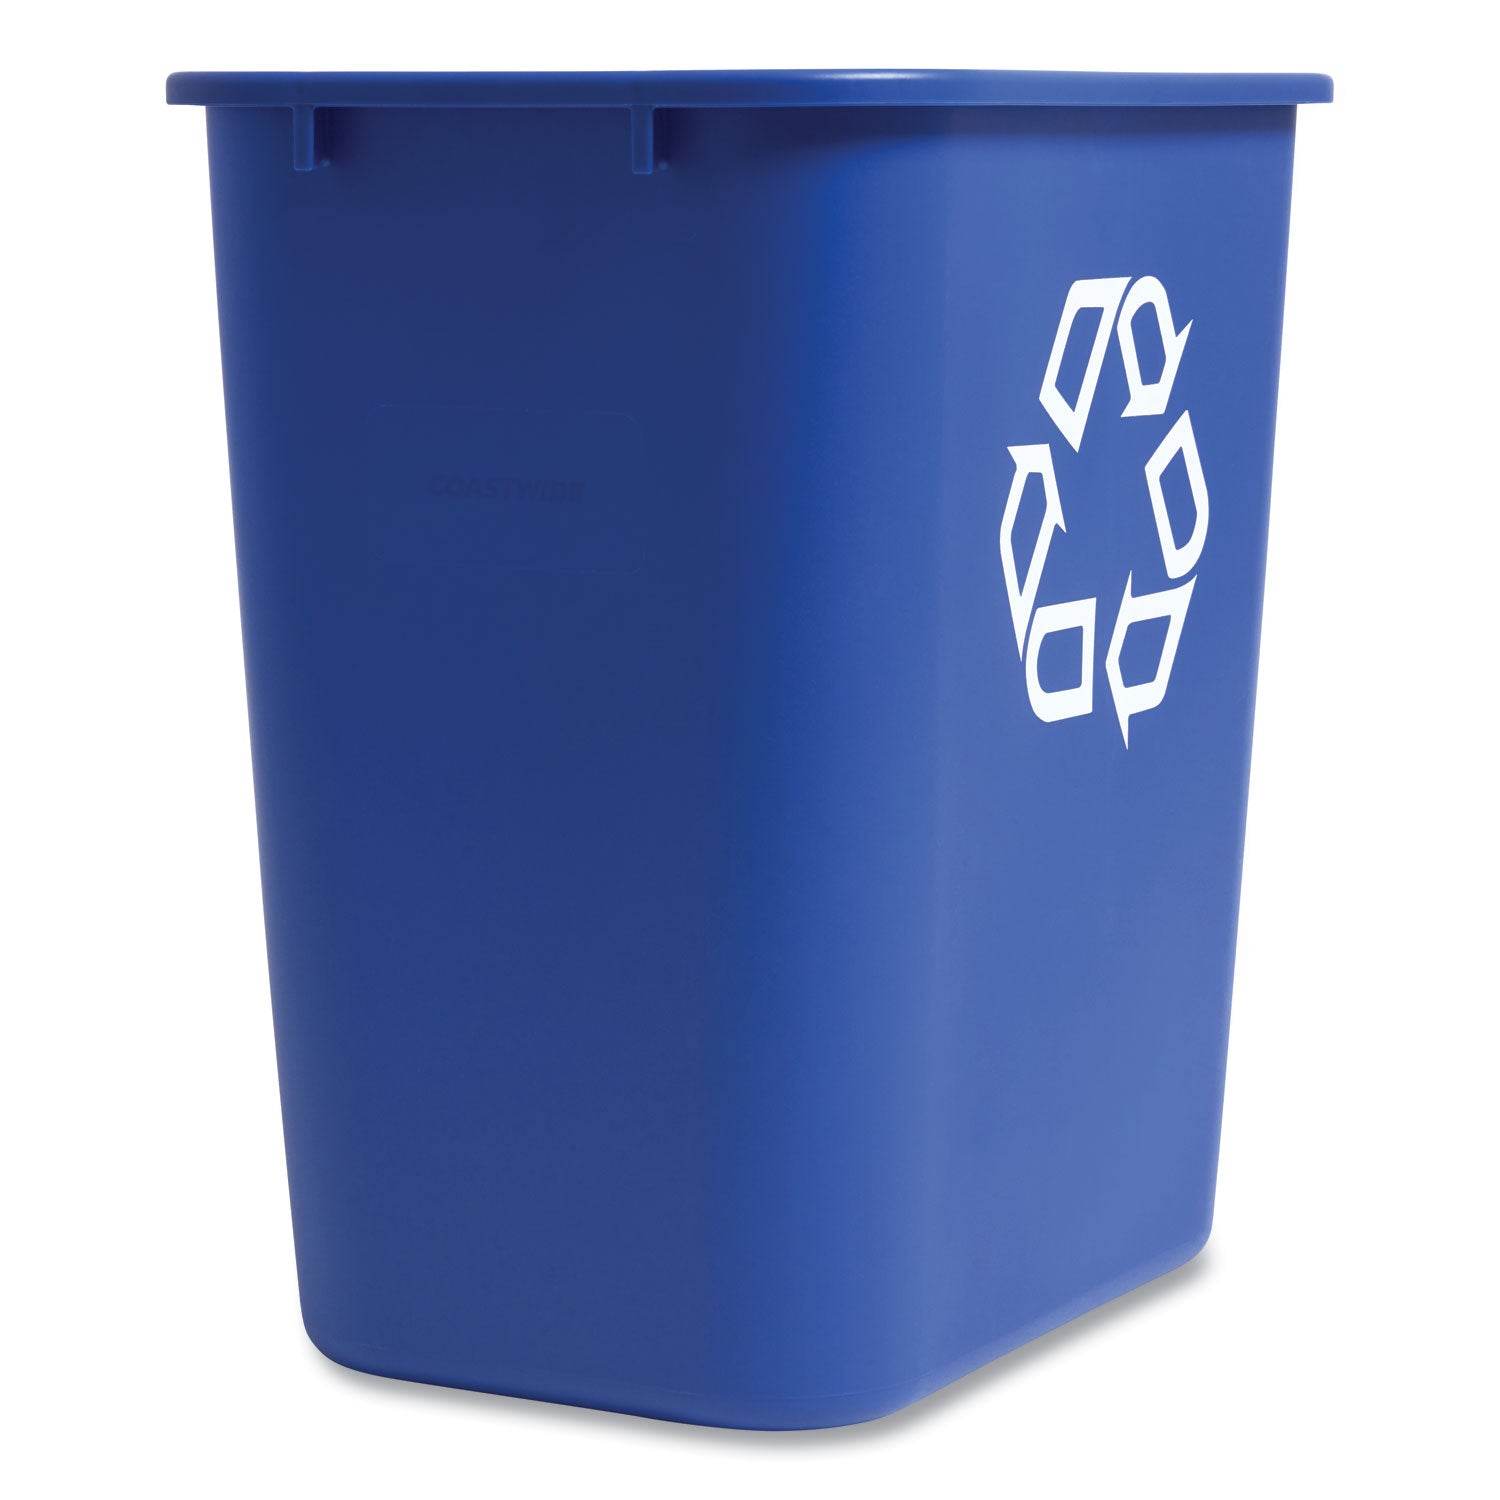 open-top-indoor-recycling-container-plastic-blue_cwz266429 - 1